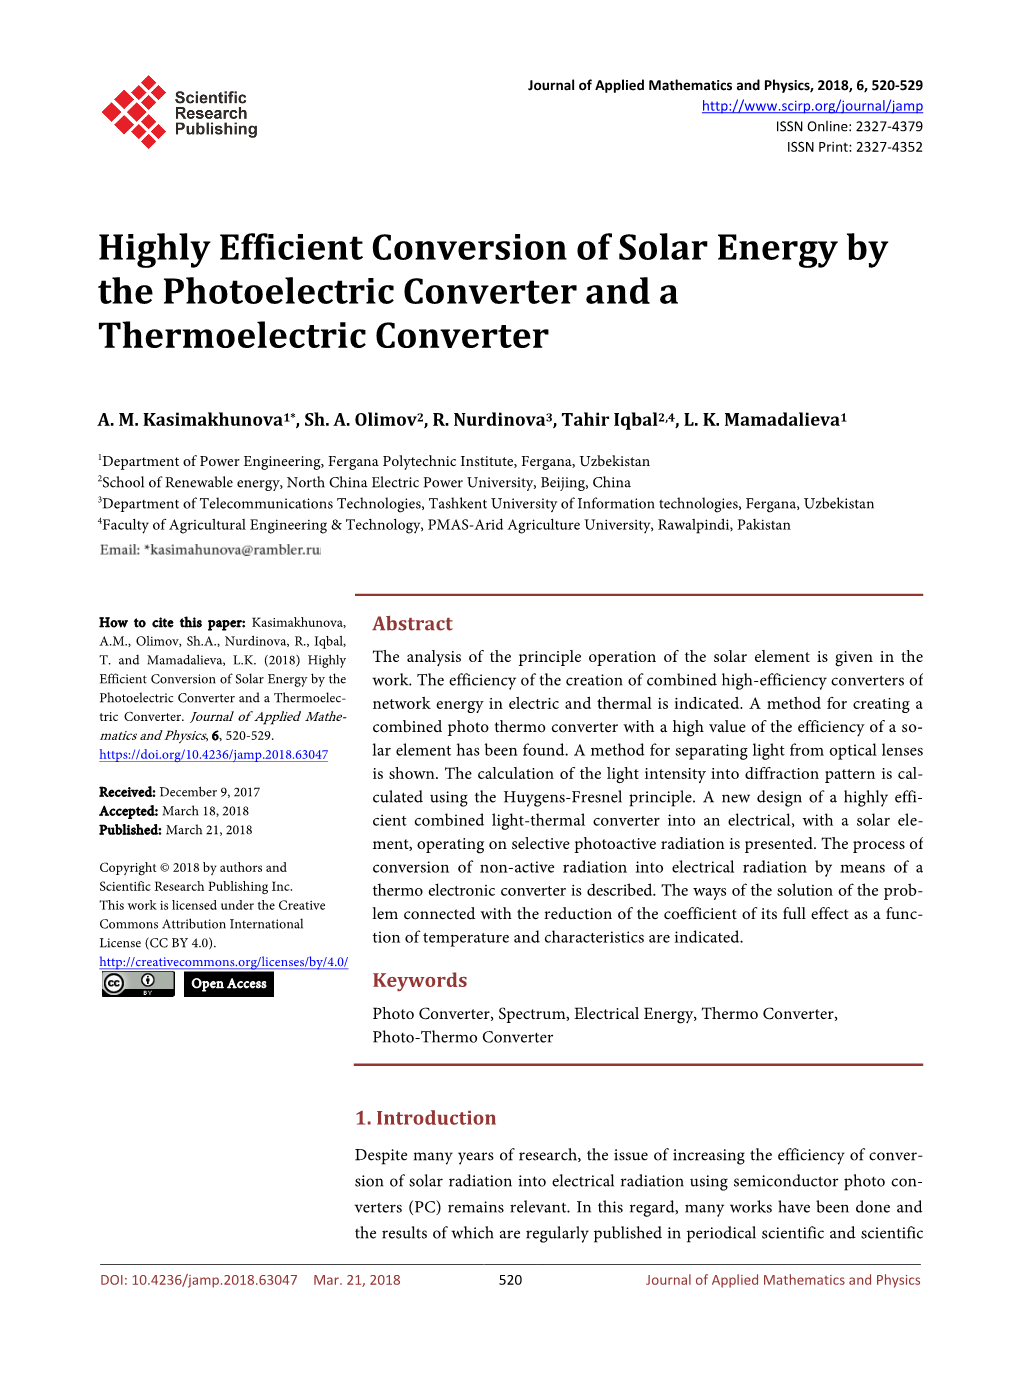 Highly Efficient Conversion of Solar Energy by the Photoelectric Converter and a Thermoelectric Converter